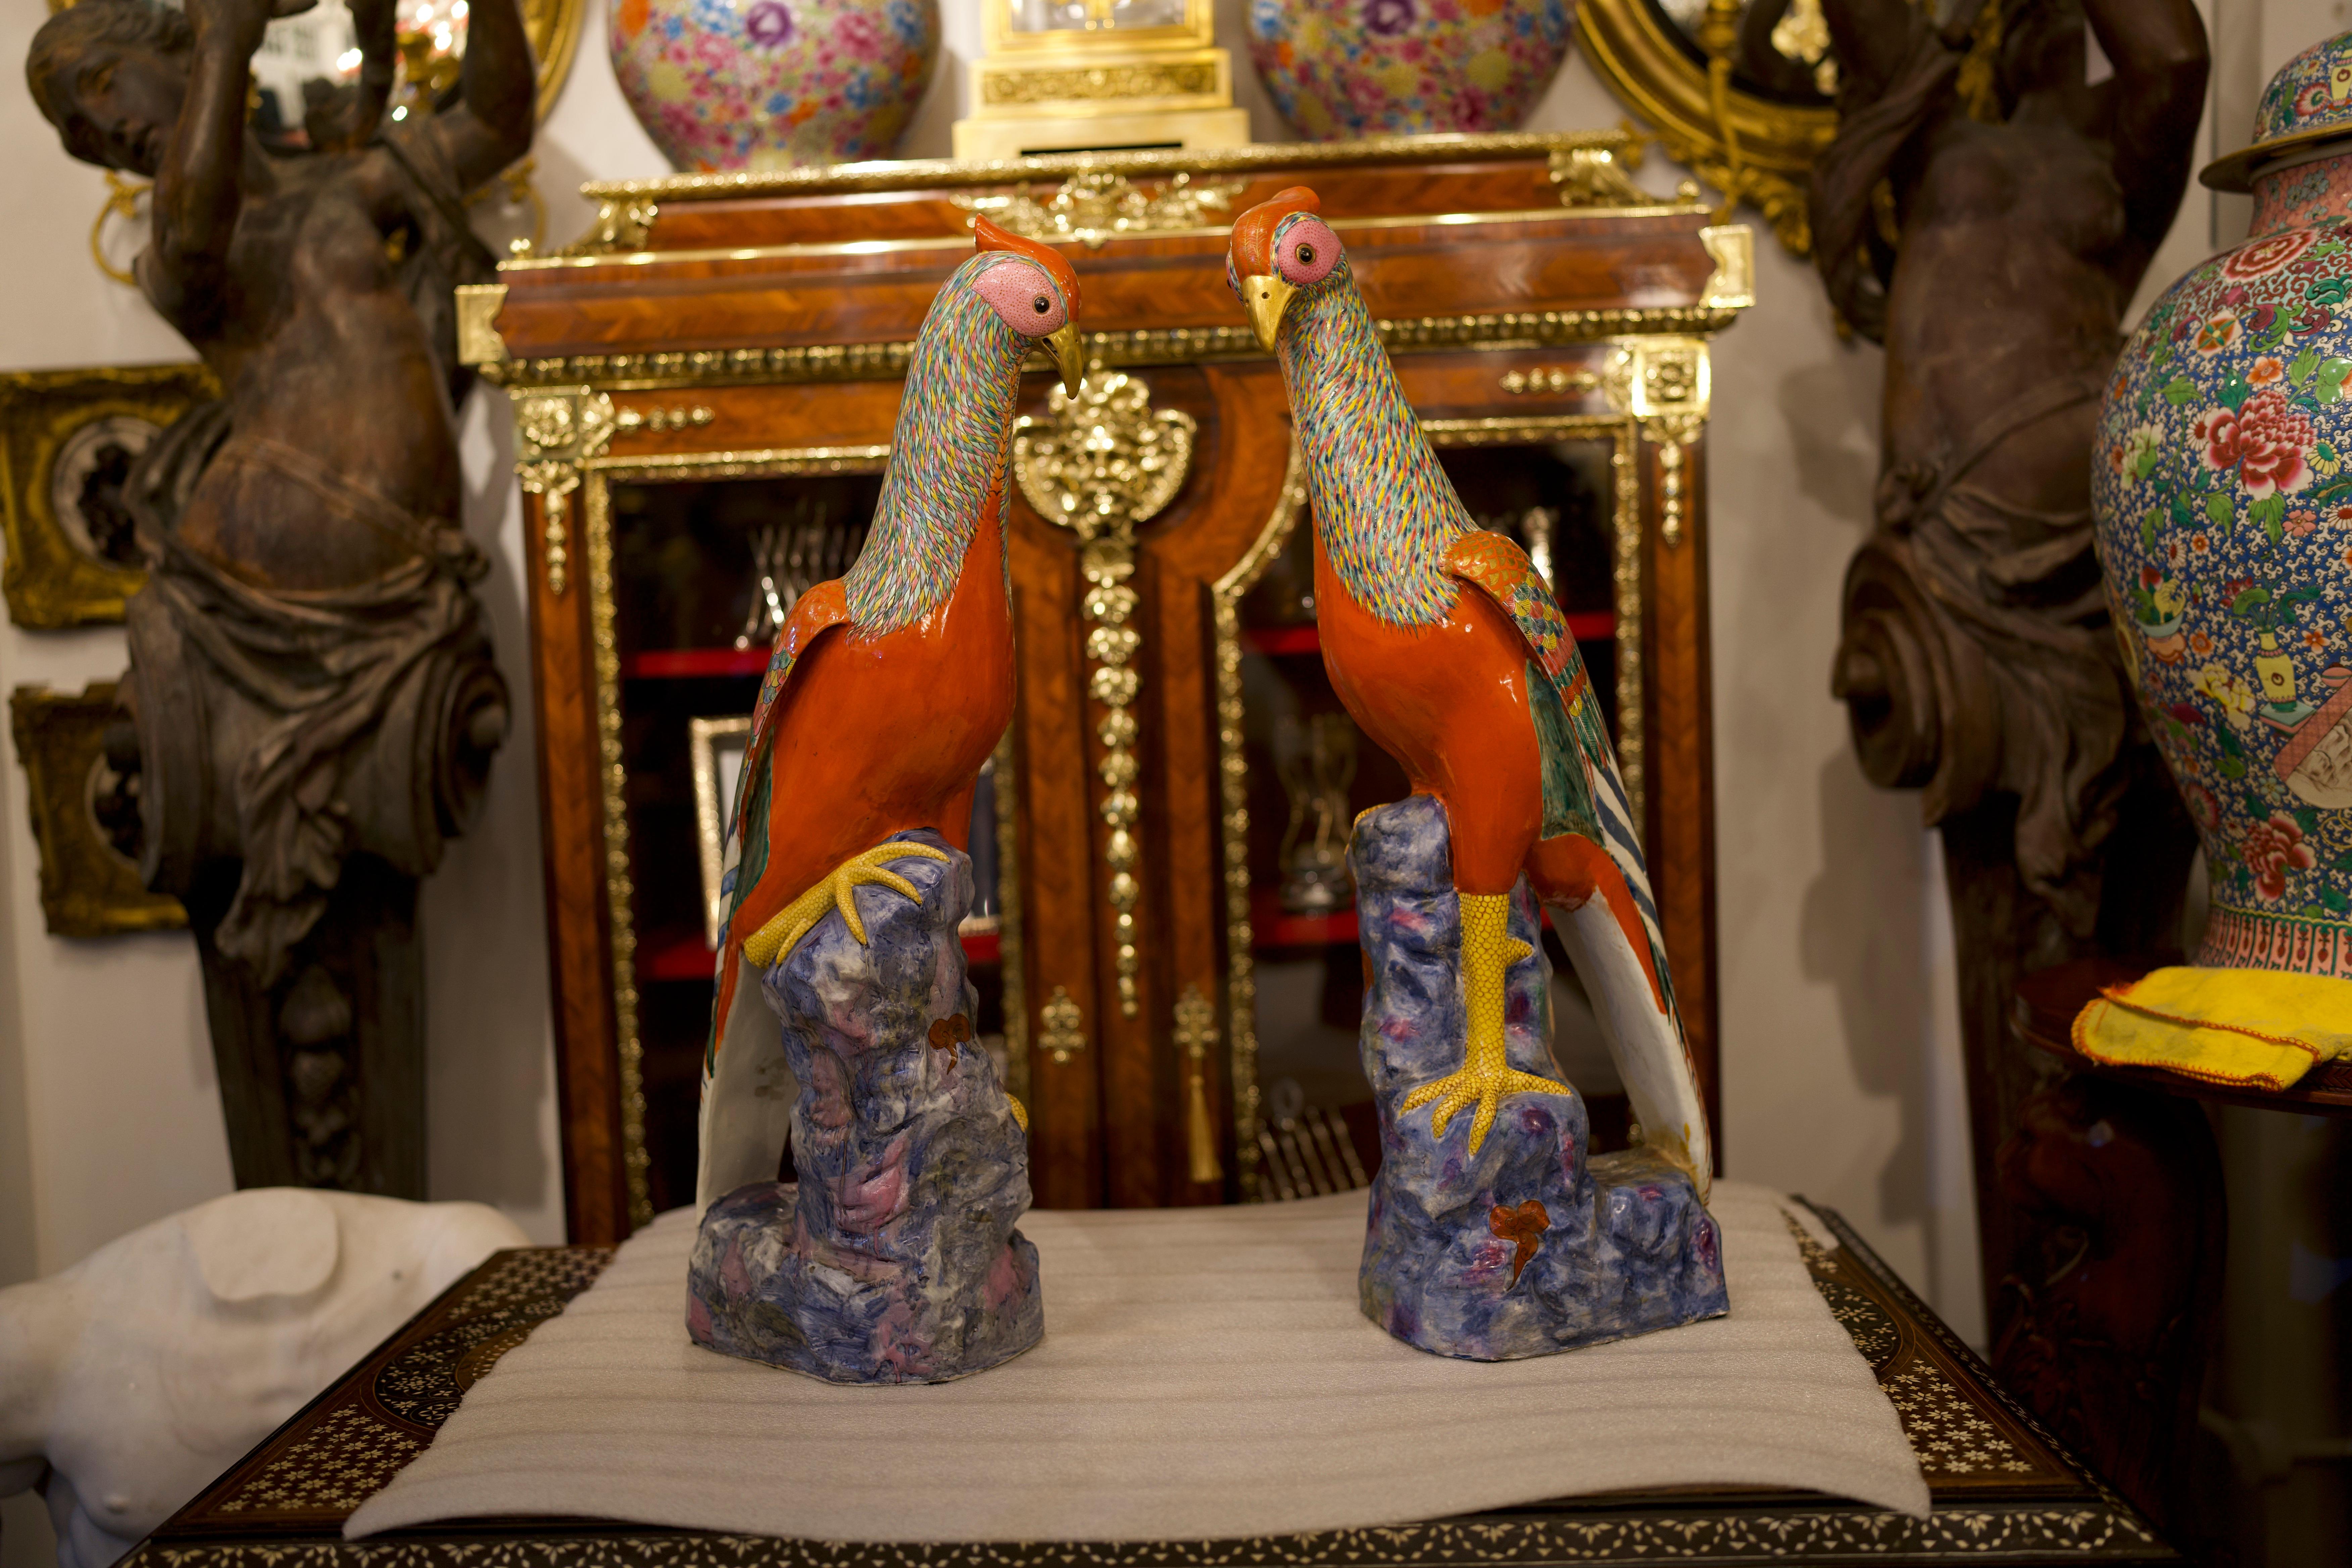 An exceptionally rare and beautiful 19th Century Pair of Large Famille Rose Pheasants by Samson.
A large pair of male and female Famille Rose pheasants by Samson. The size alone makes them very rare and highly collectable. They are in extremely